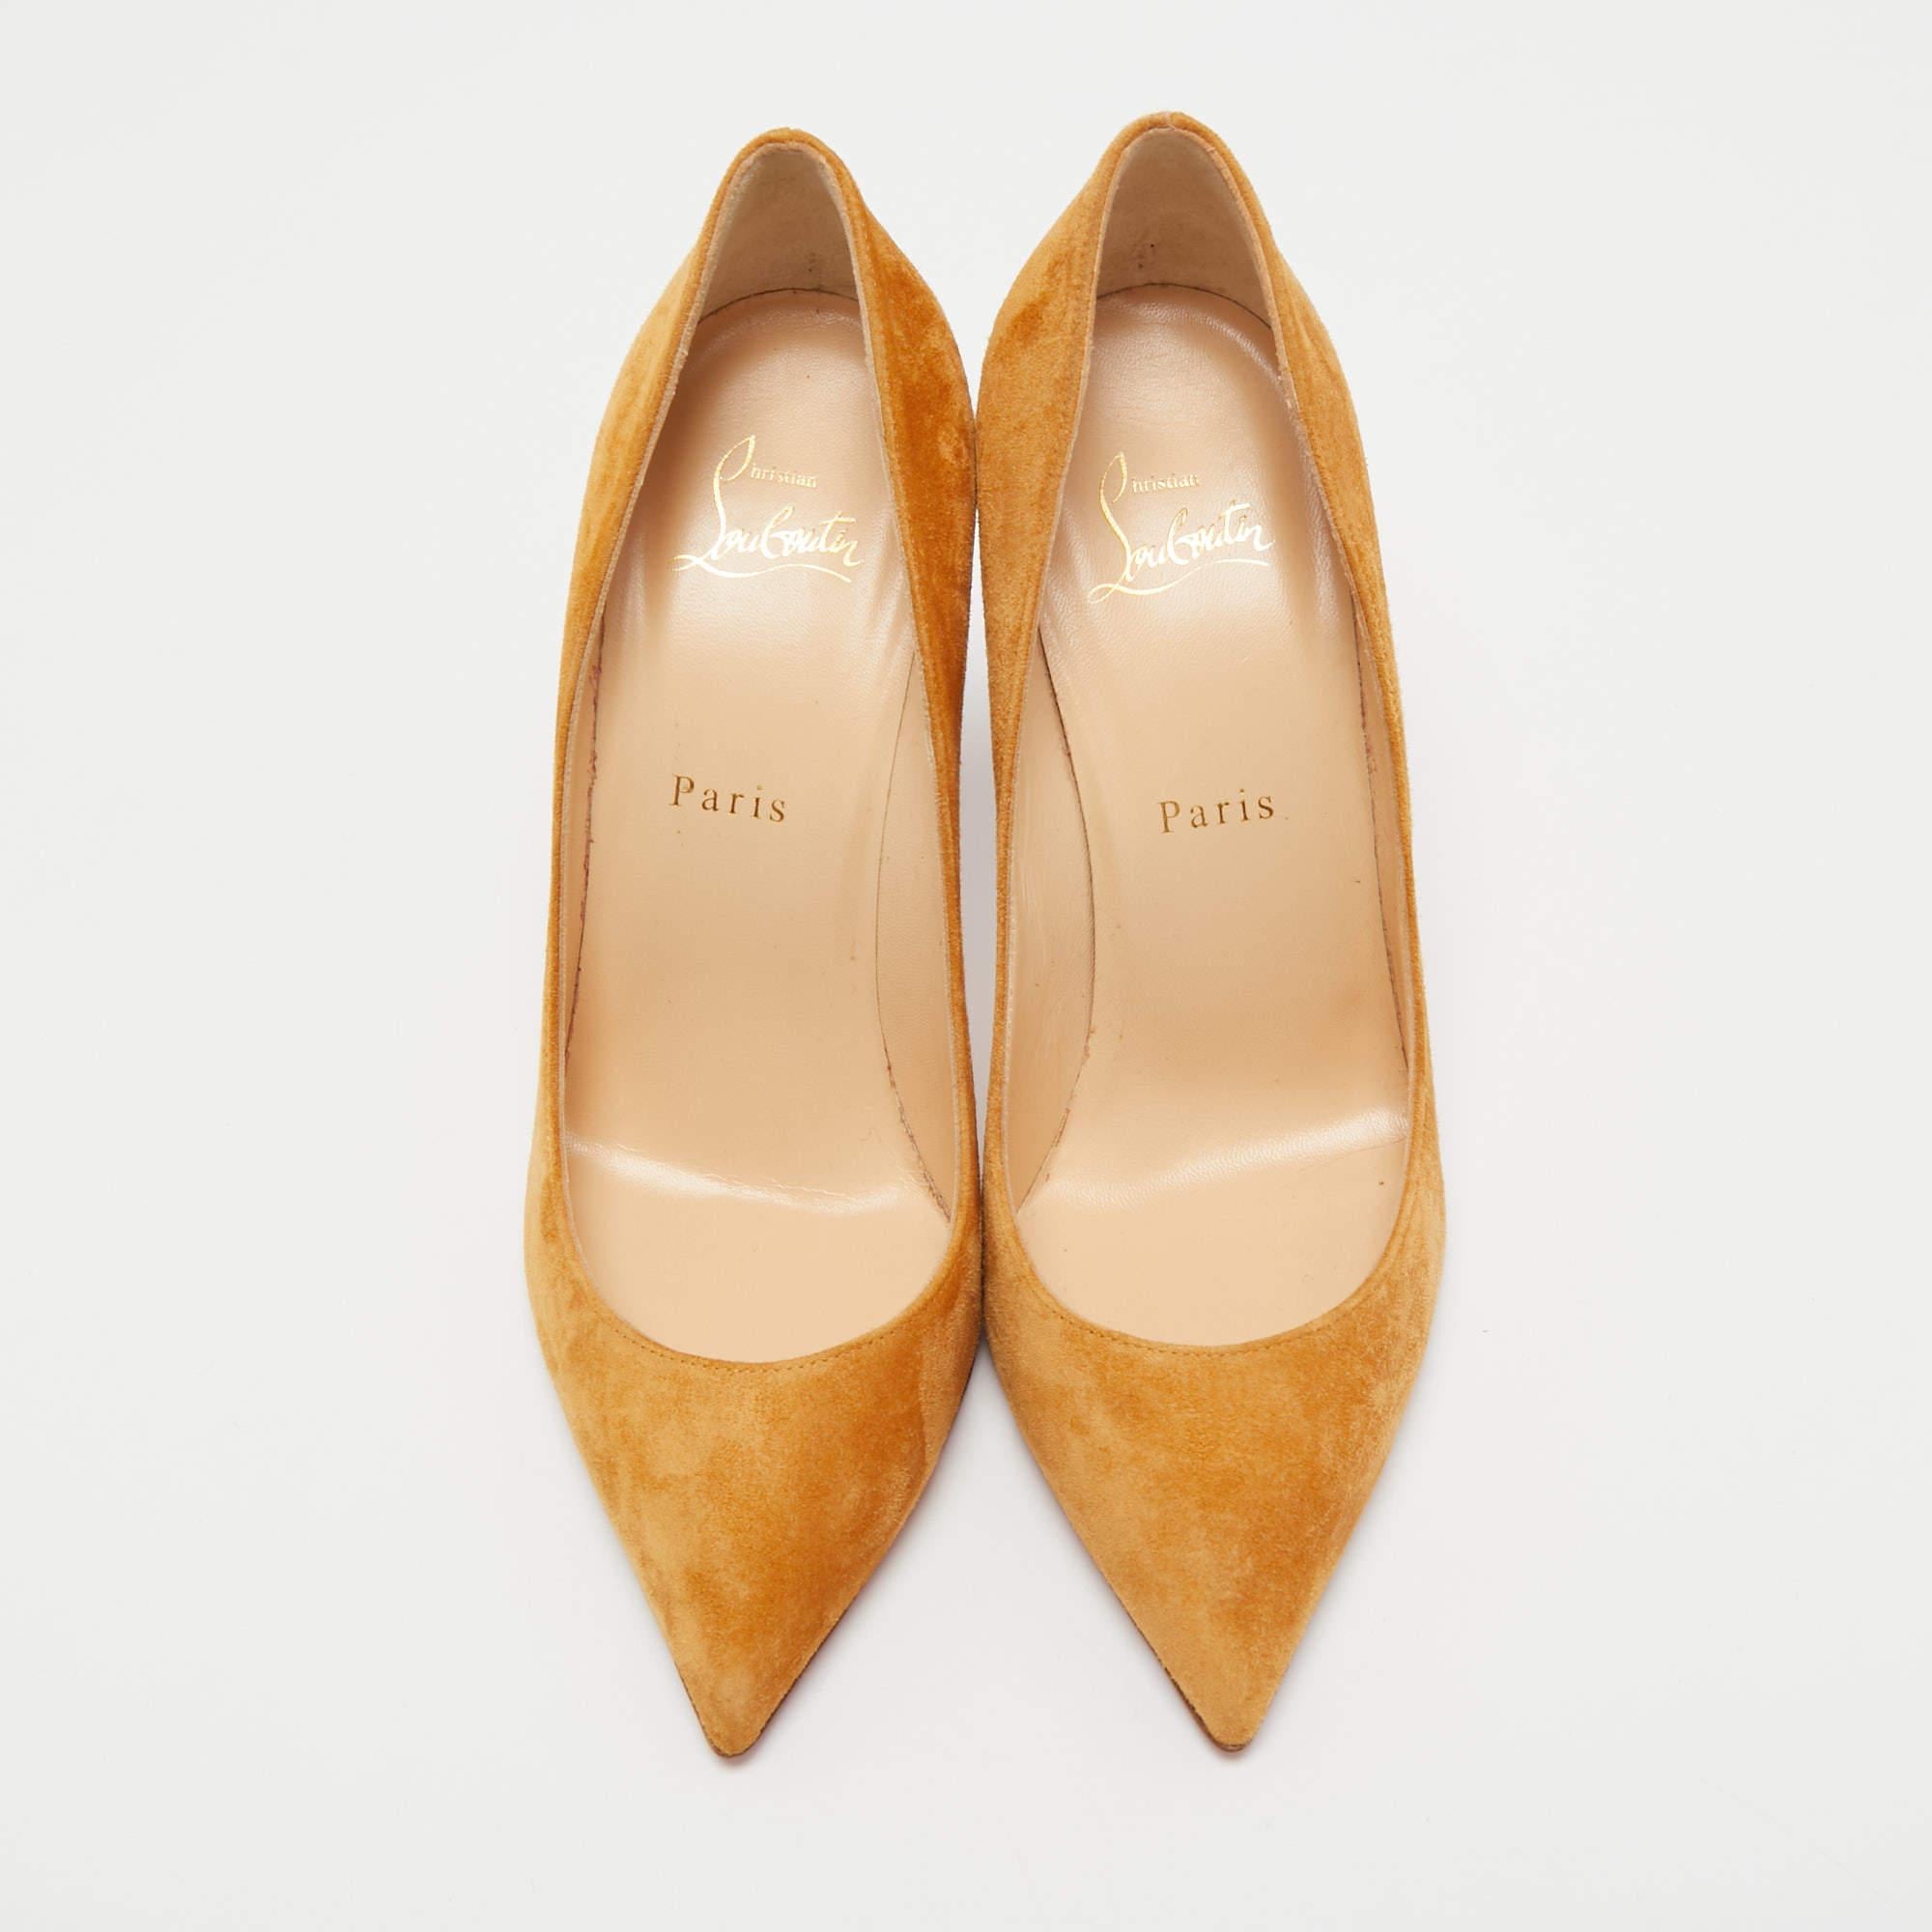 Named after English model Kate Moss, this pair of Christian Louboutin So Kate pumps reflects elegance and sophistication in every step. Proving the brand's expertise in the art of stiletto making, it has been diligently crafted from suede on the